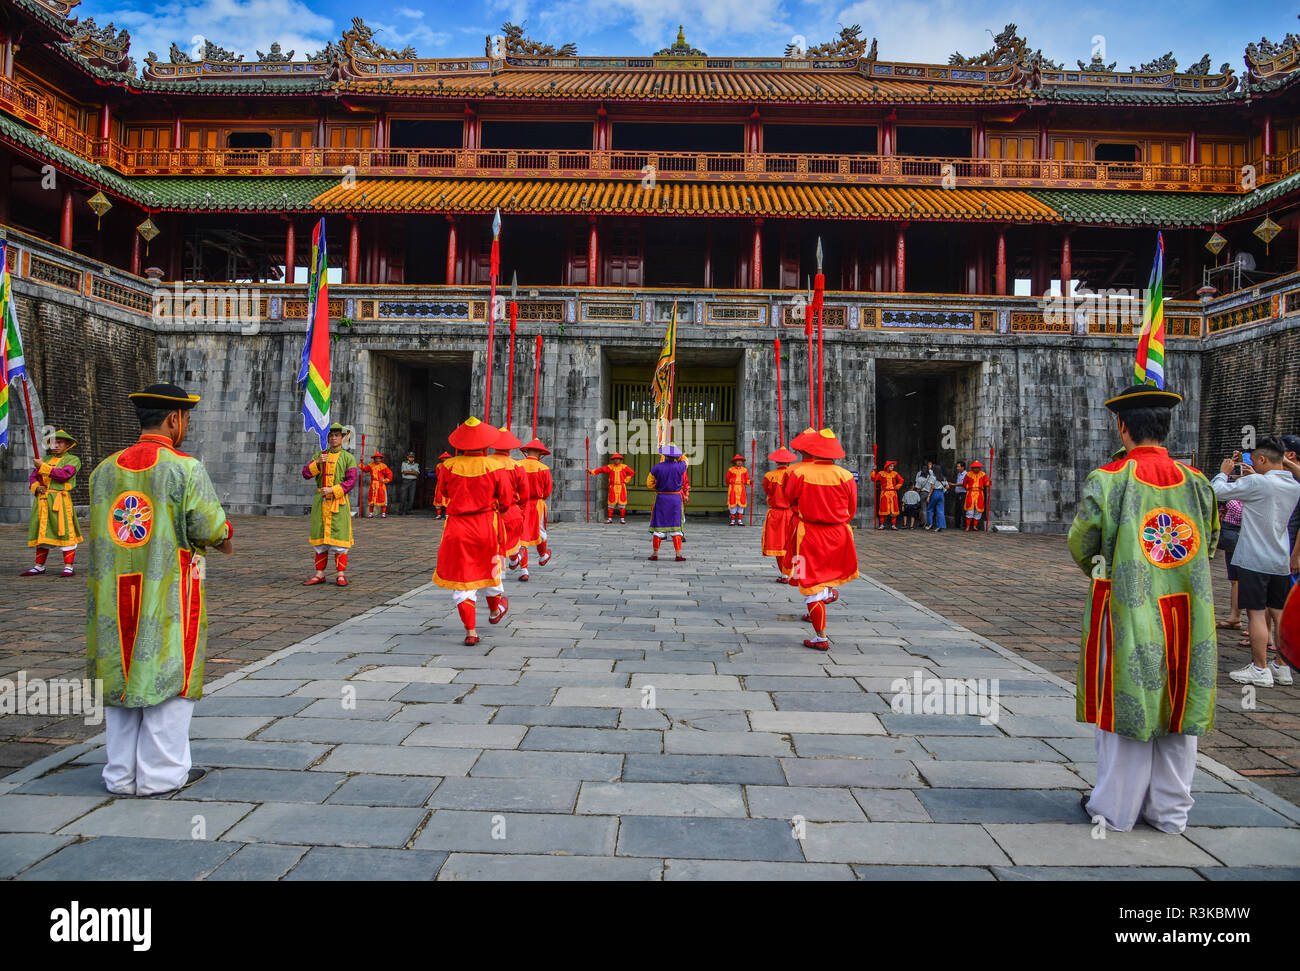 Hue, Vietnam - Jul 21, 2018. The royal guards parade marching to the Hue Imperial City (The Citadel) for change of guards cermony. Stock Photo